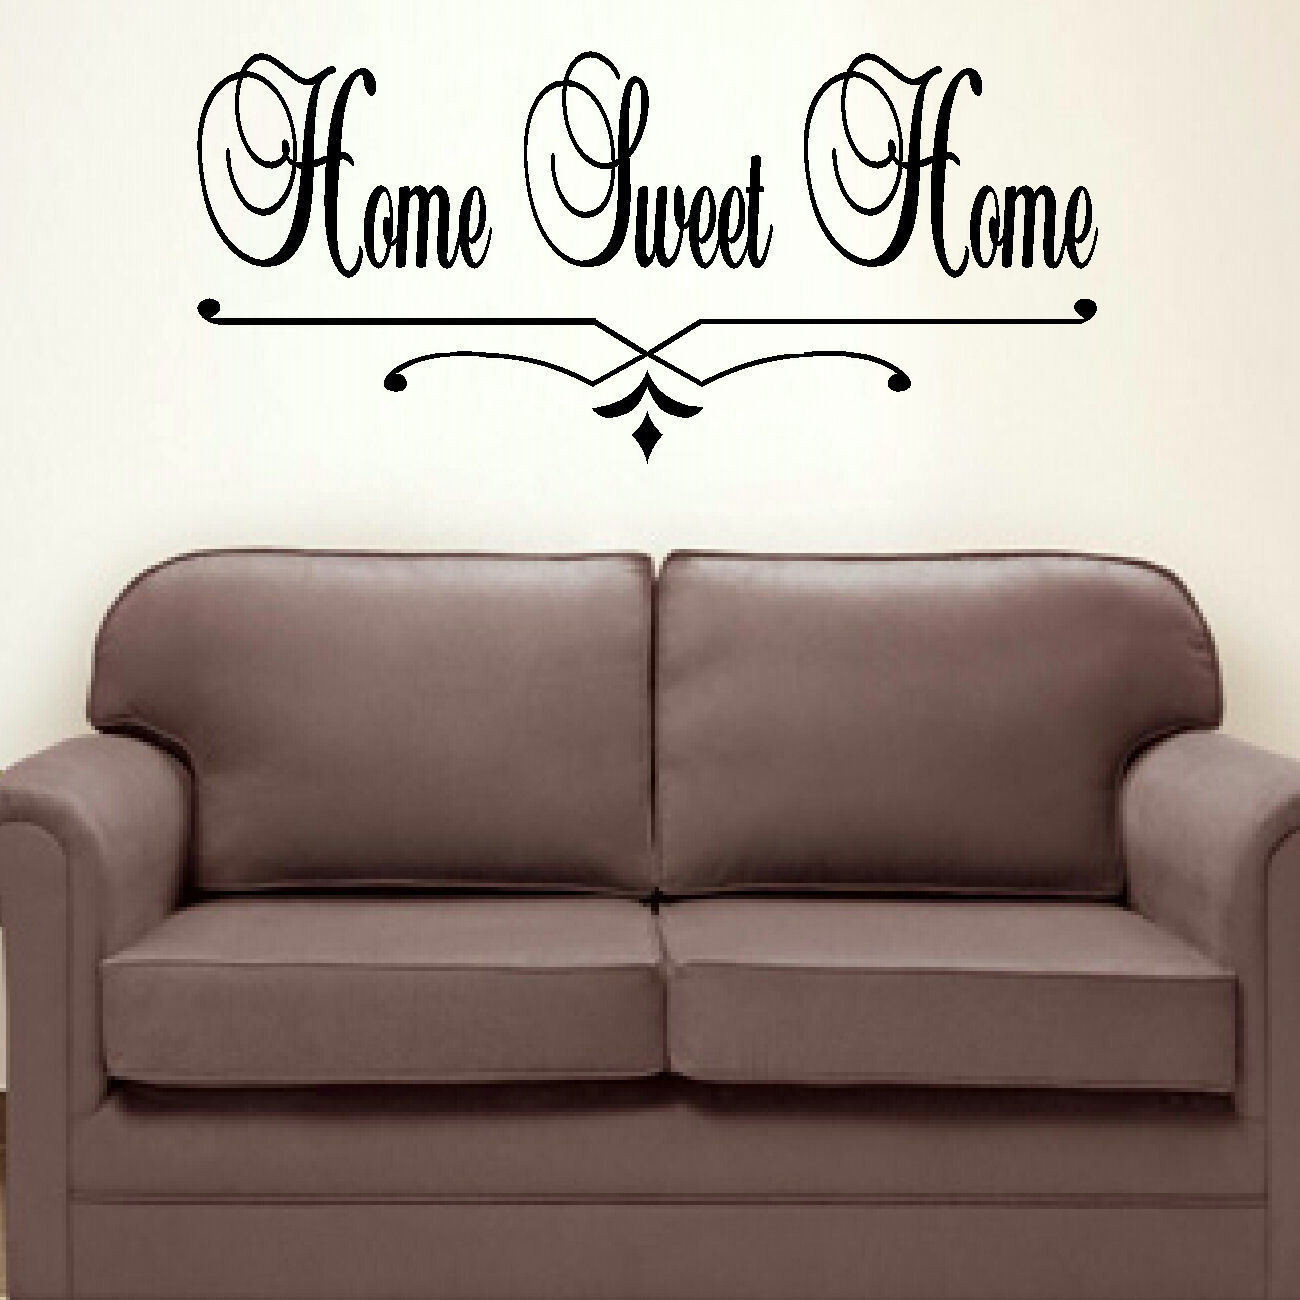 Large Bedroom Wall Art
 LARGE BEDROOM QUOTE HOME SWEET HOME WALL ART STICKER